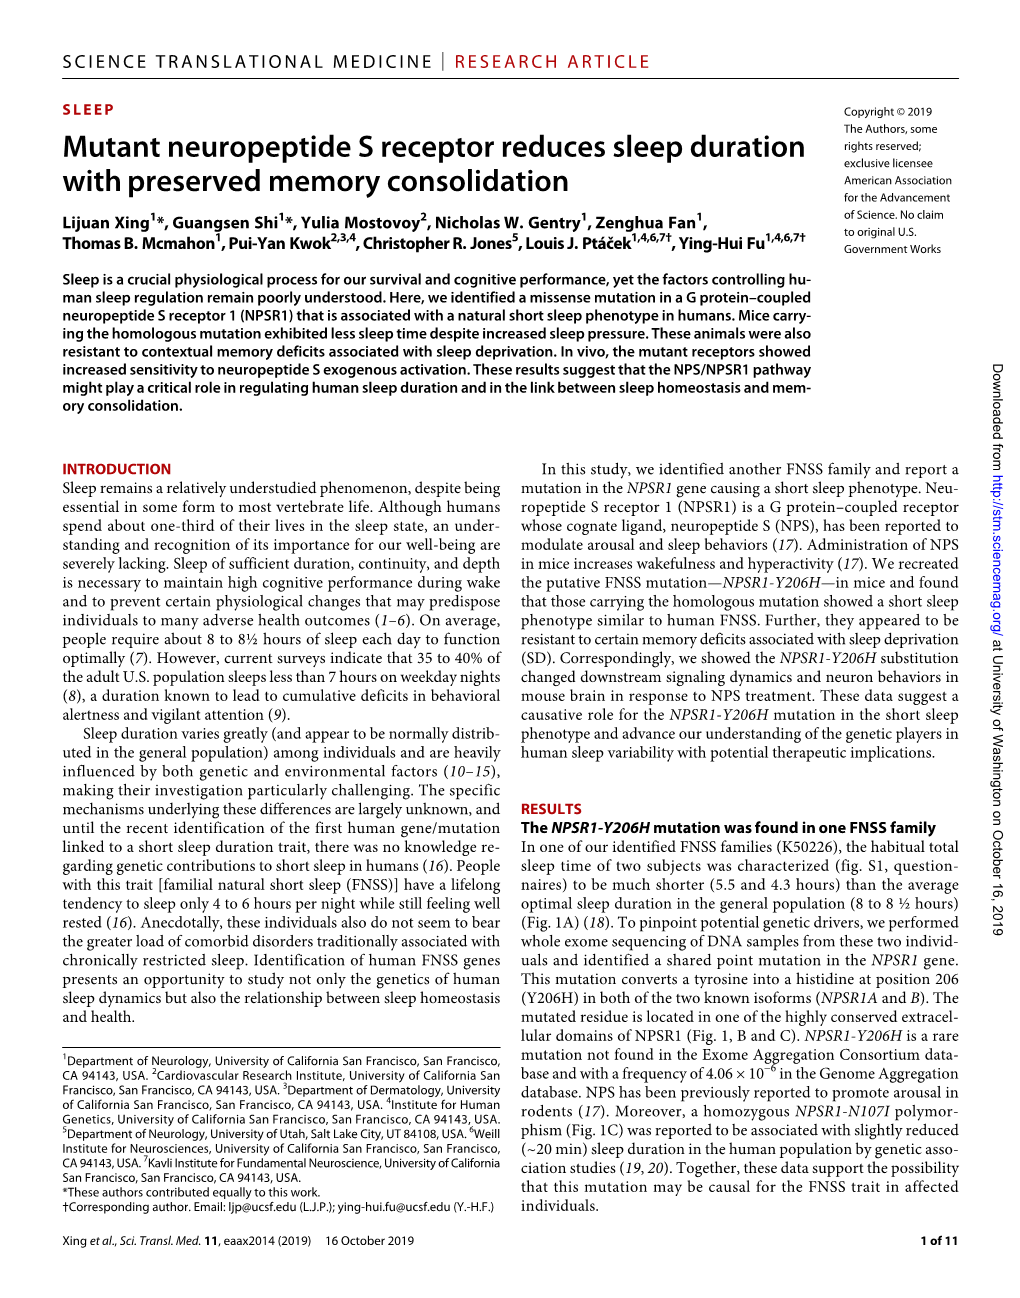 Mutant Neuropeptide S Receptor Reduces Sleep Duration with Preserved Memory Consolidation Lijuan Xing, Guangsen Shi, Yulia Mostovoy, Nicholas W